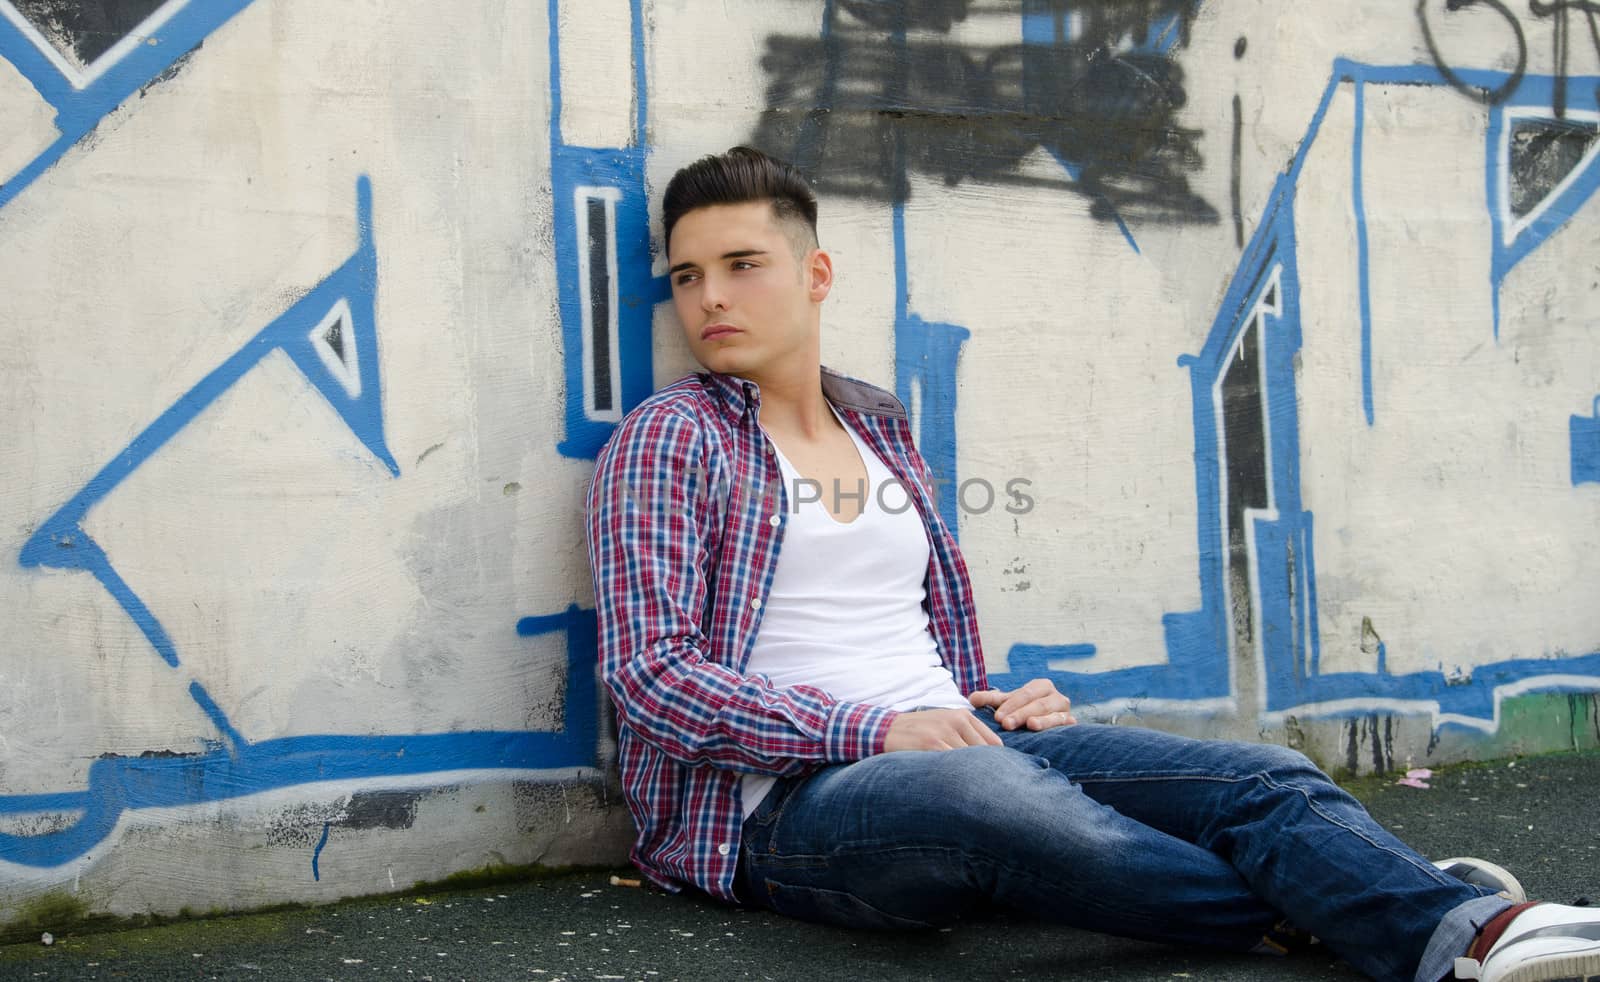 Handsome young man sitting on ground against colorful graffiti covered wall